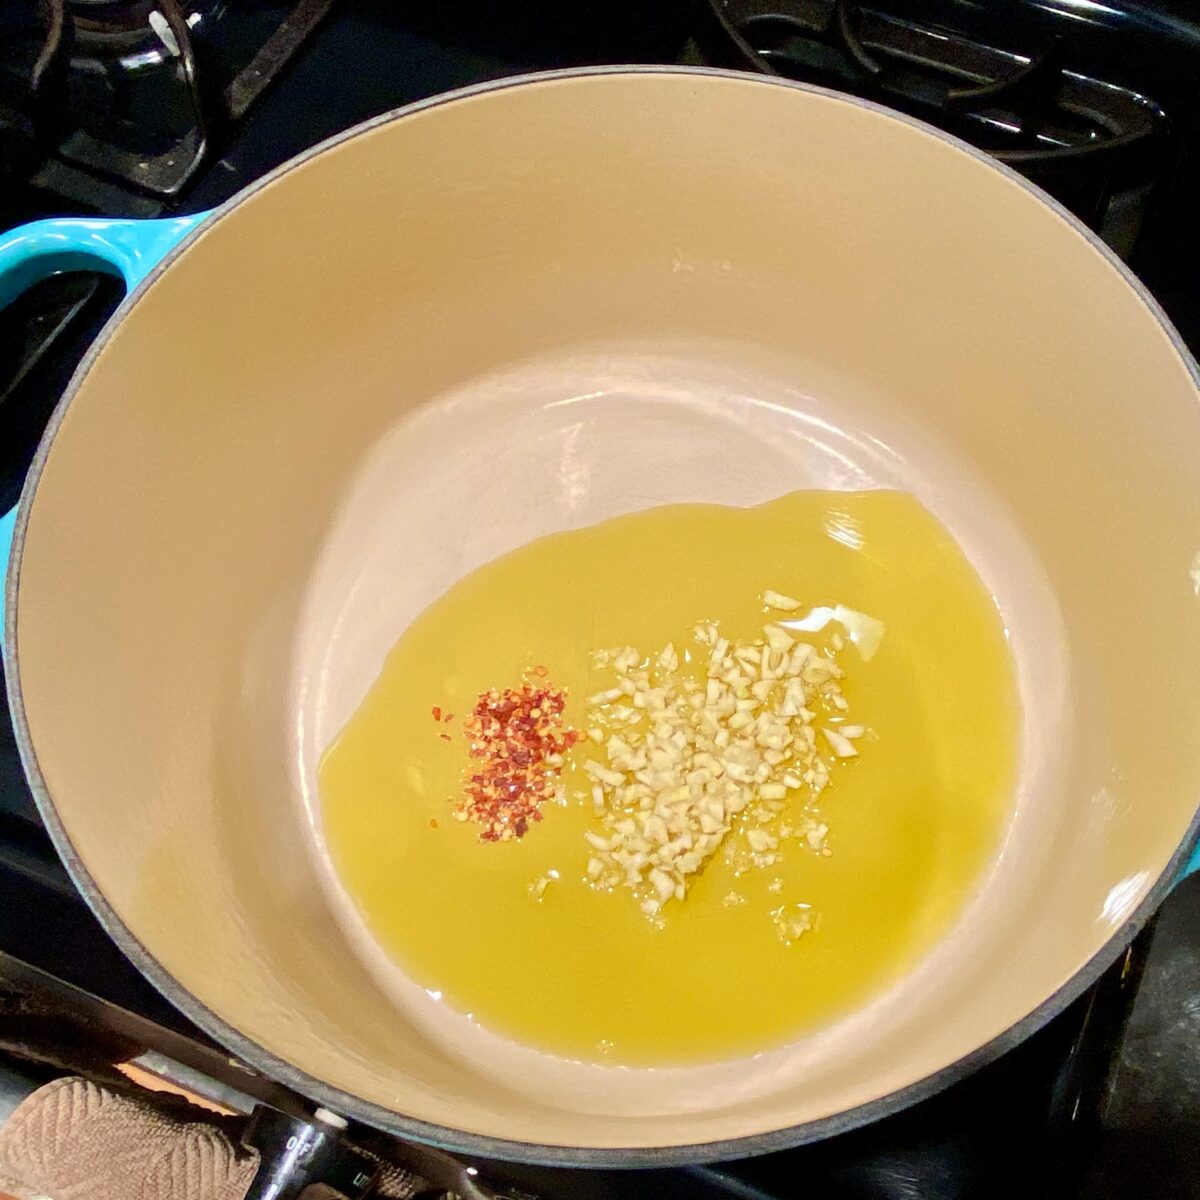 Pepper flake, garlic, and olive oil, starting from room temperature, and slowly heating.